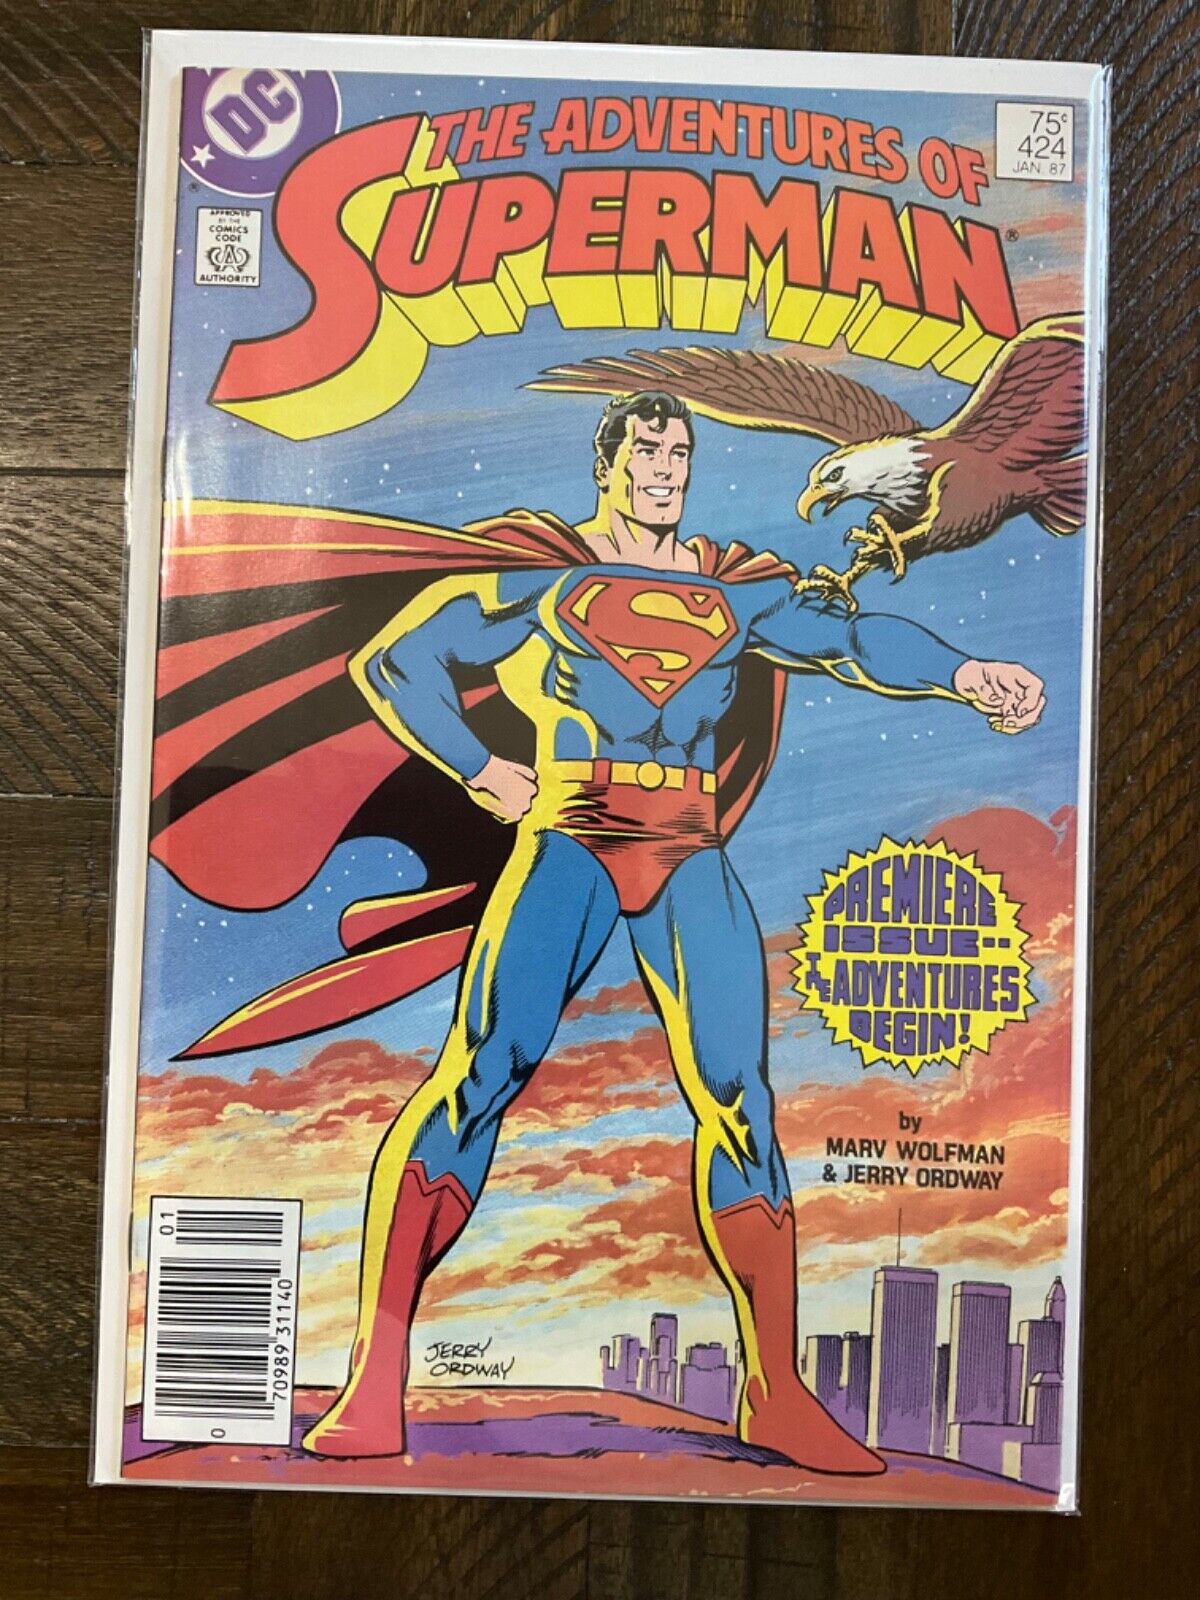 ADVENTURES  OF SUPERMAN VOL. 1 - YOU PICK THE ISSUE - DC - ISSUE 424-587 VF/NM